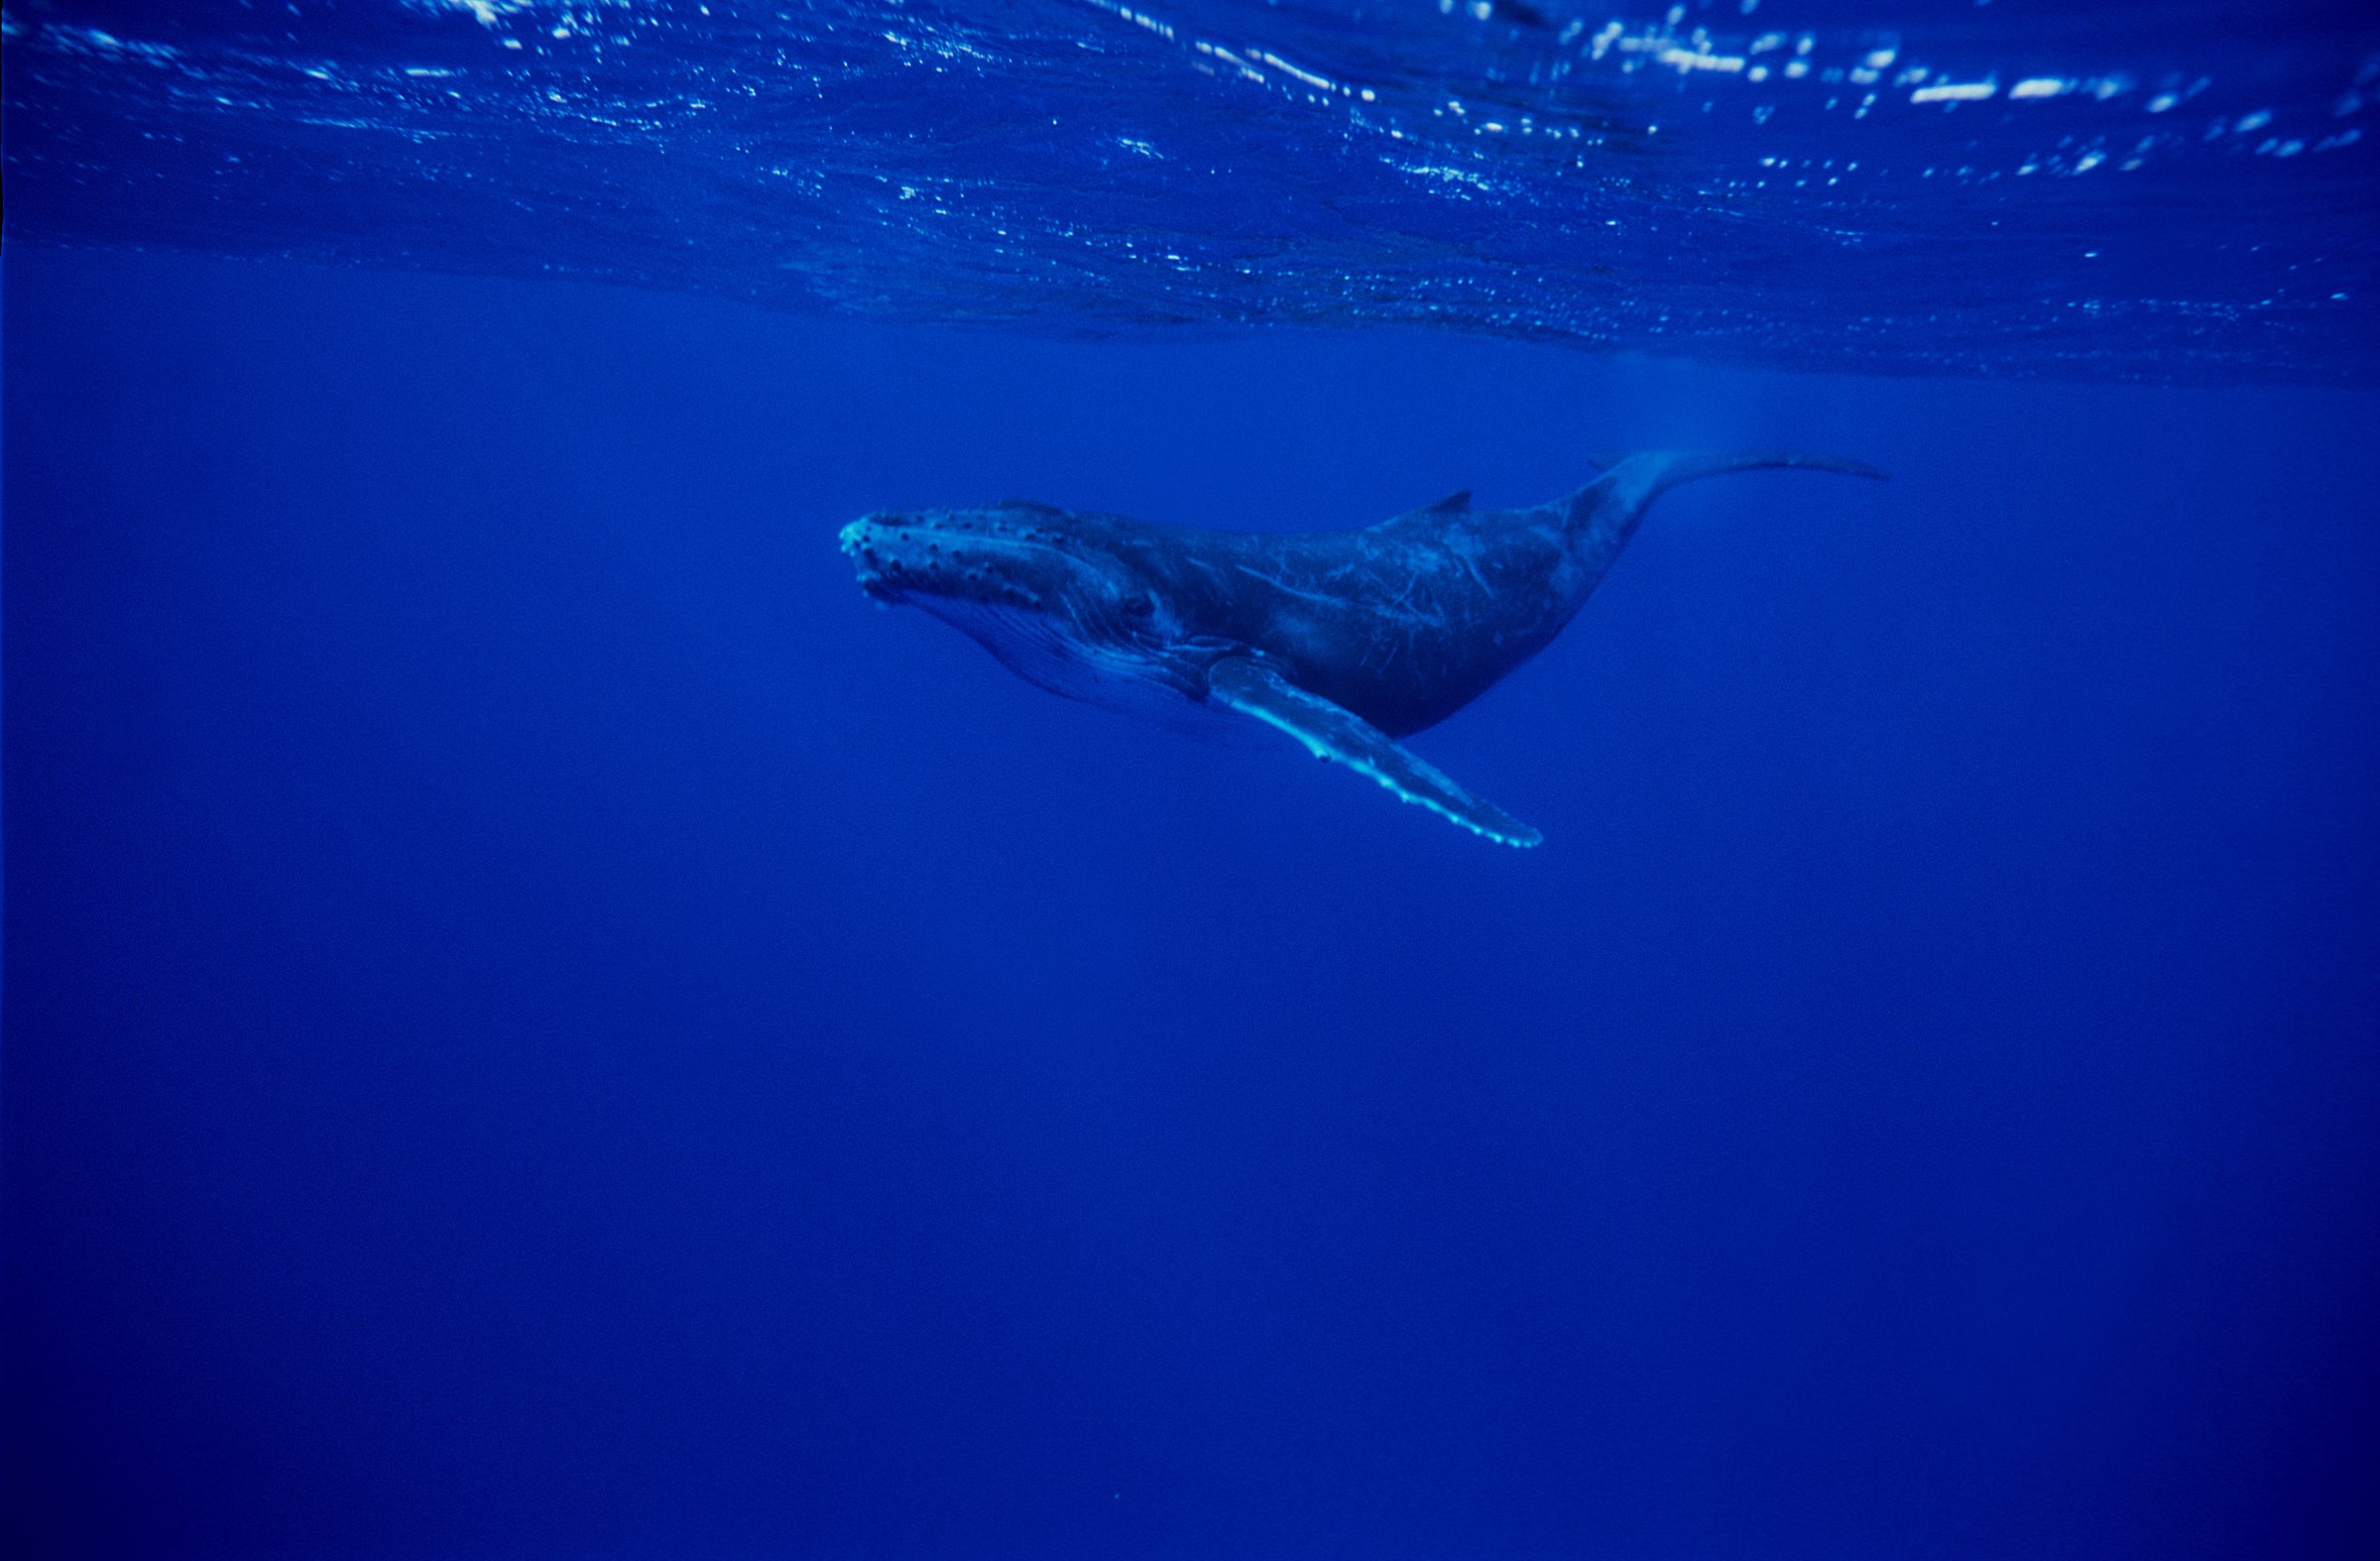 No snickering please: A humpback whale on the prowl